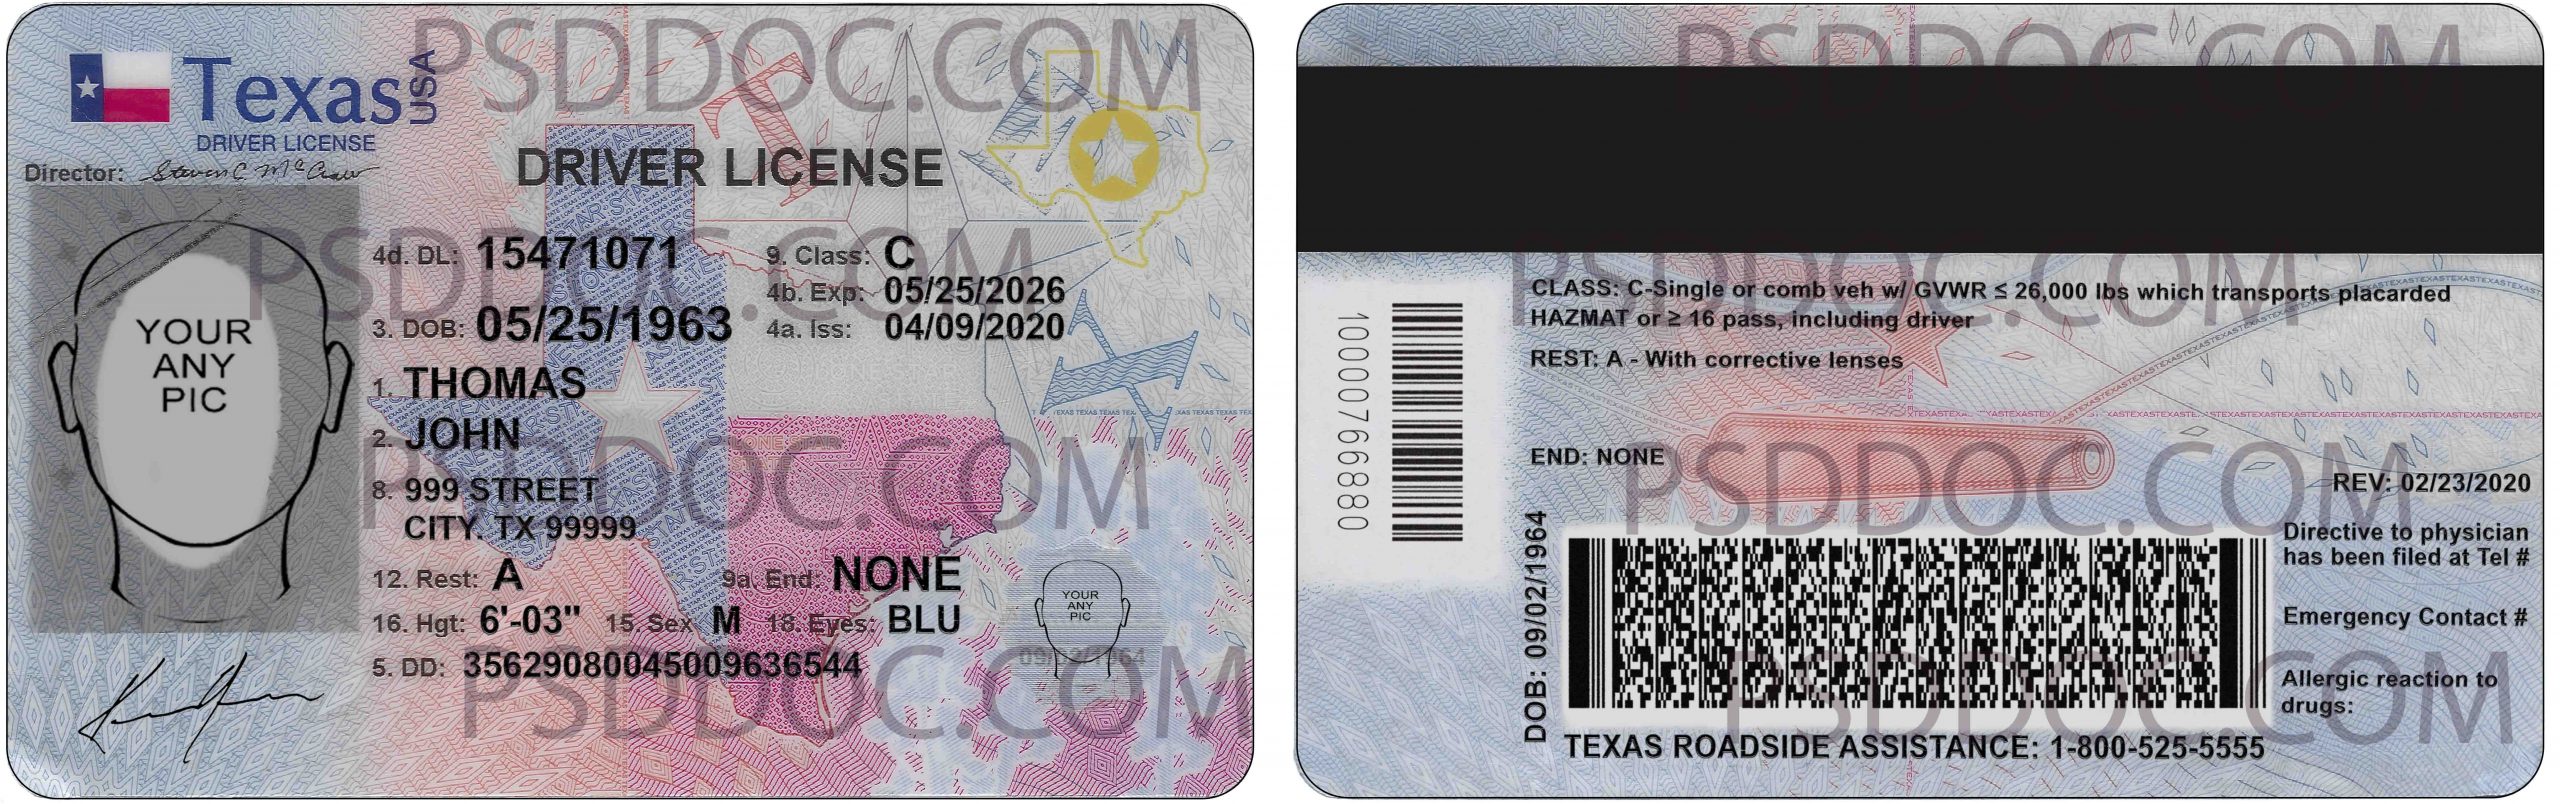 Texas Driver License NEW Scaled 